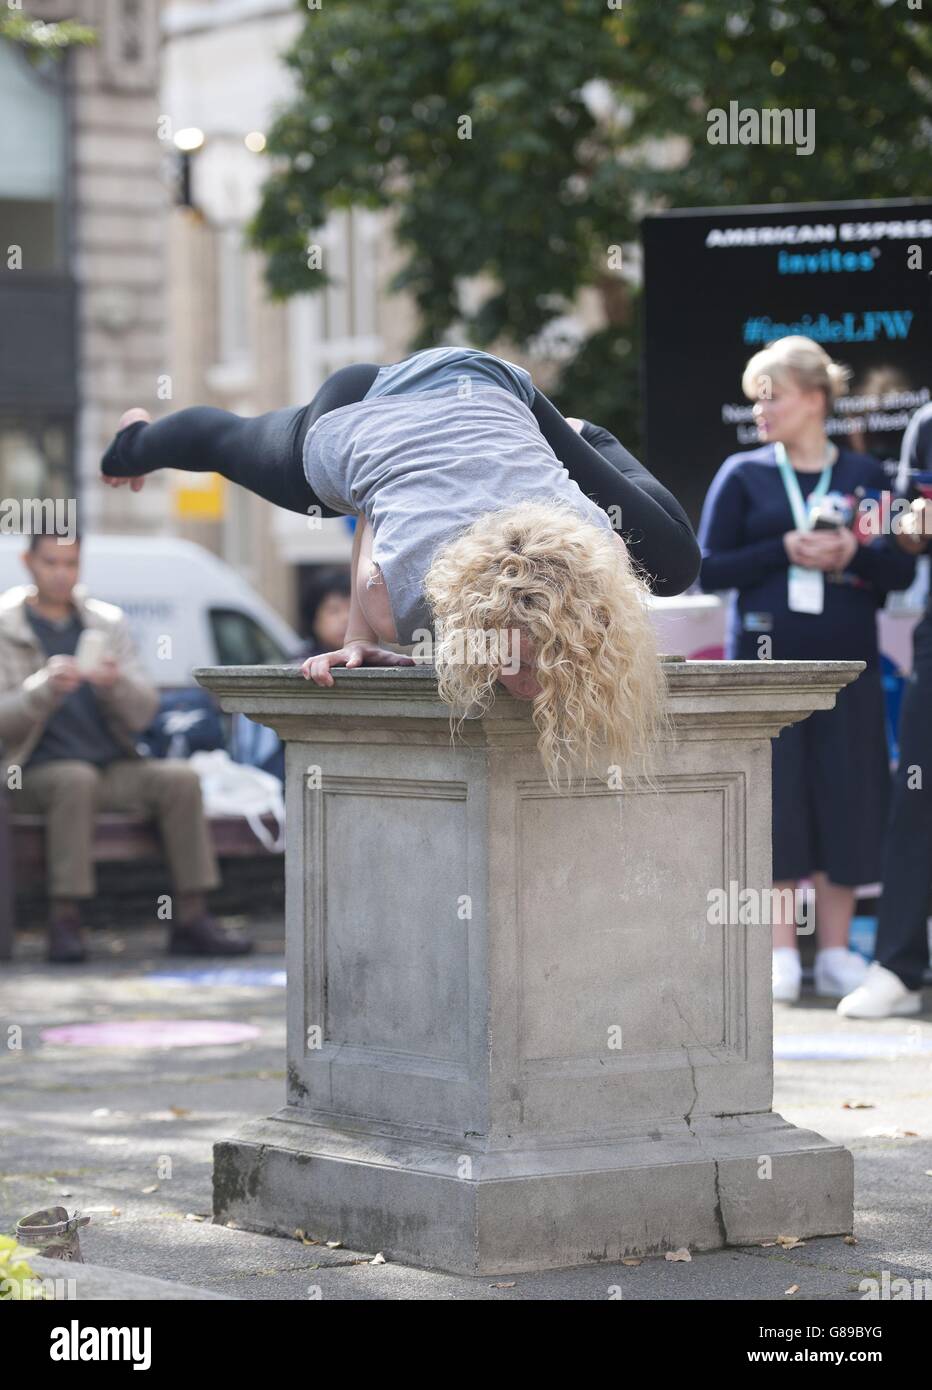 An employee from Starseeds performs in Golden Square during the Spring/Summer 2016 London Fashion Week in London. Stock Photo